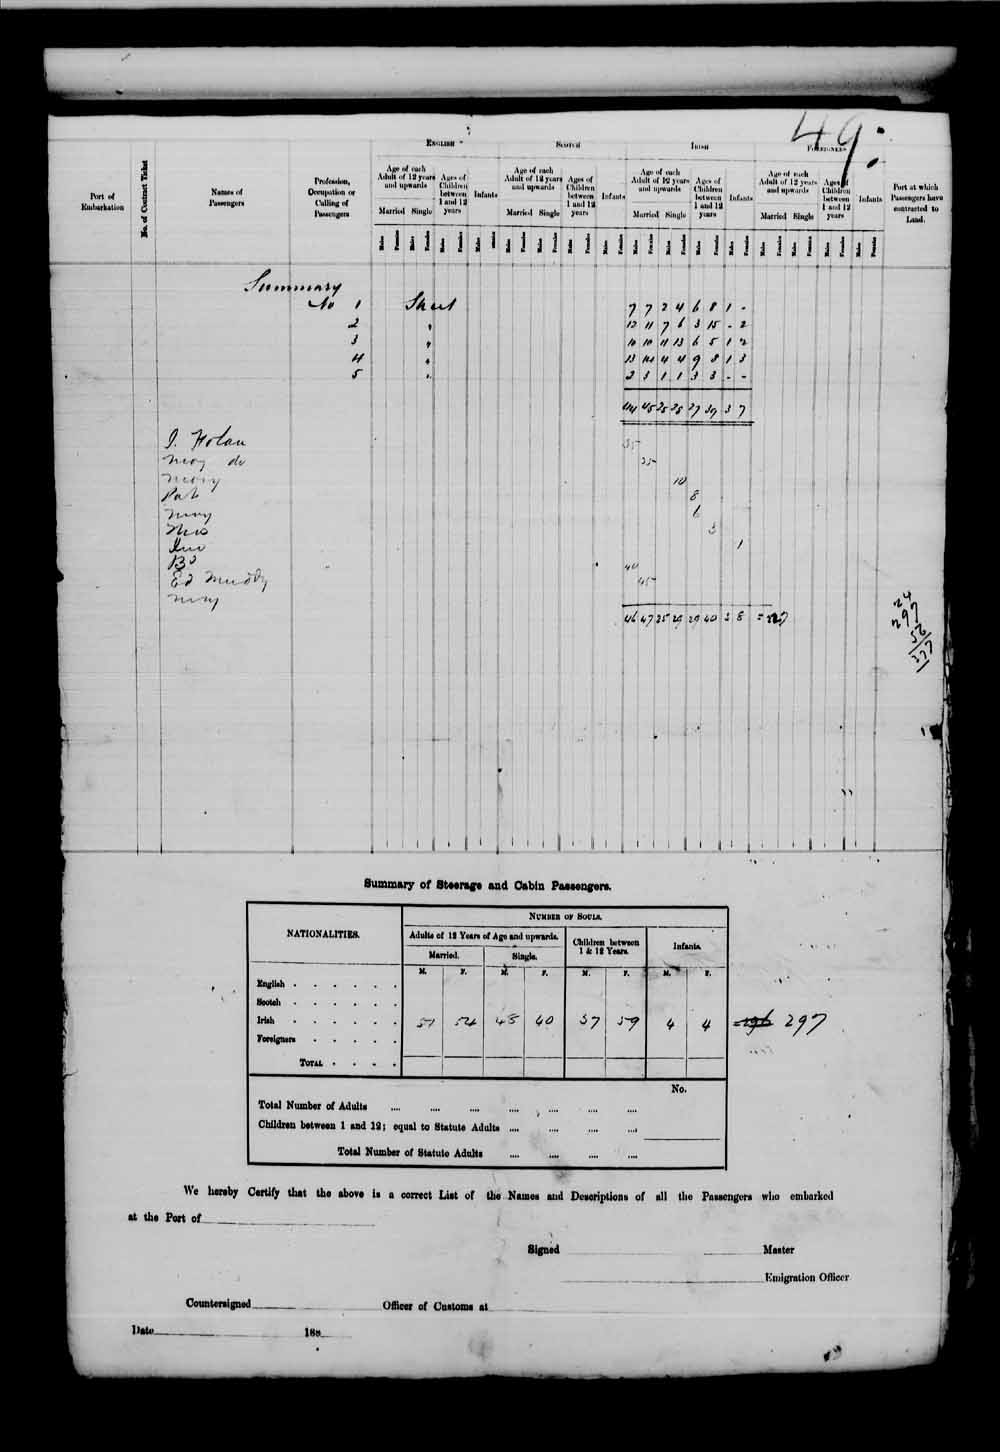 Digitized page of Passenger Lists for Image No.: e003543409